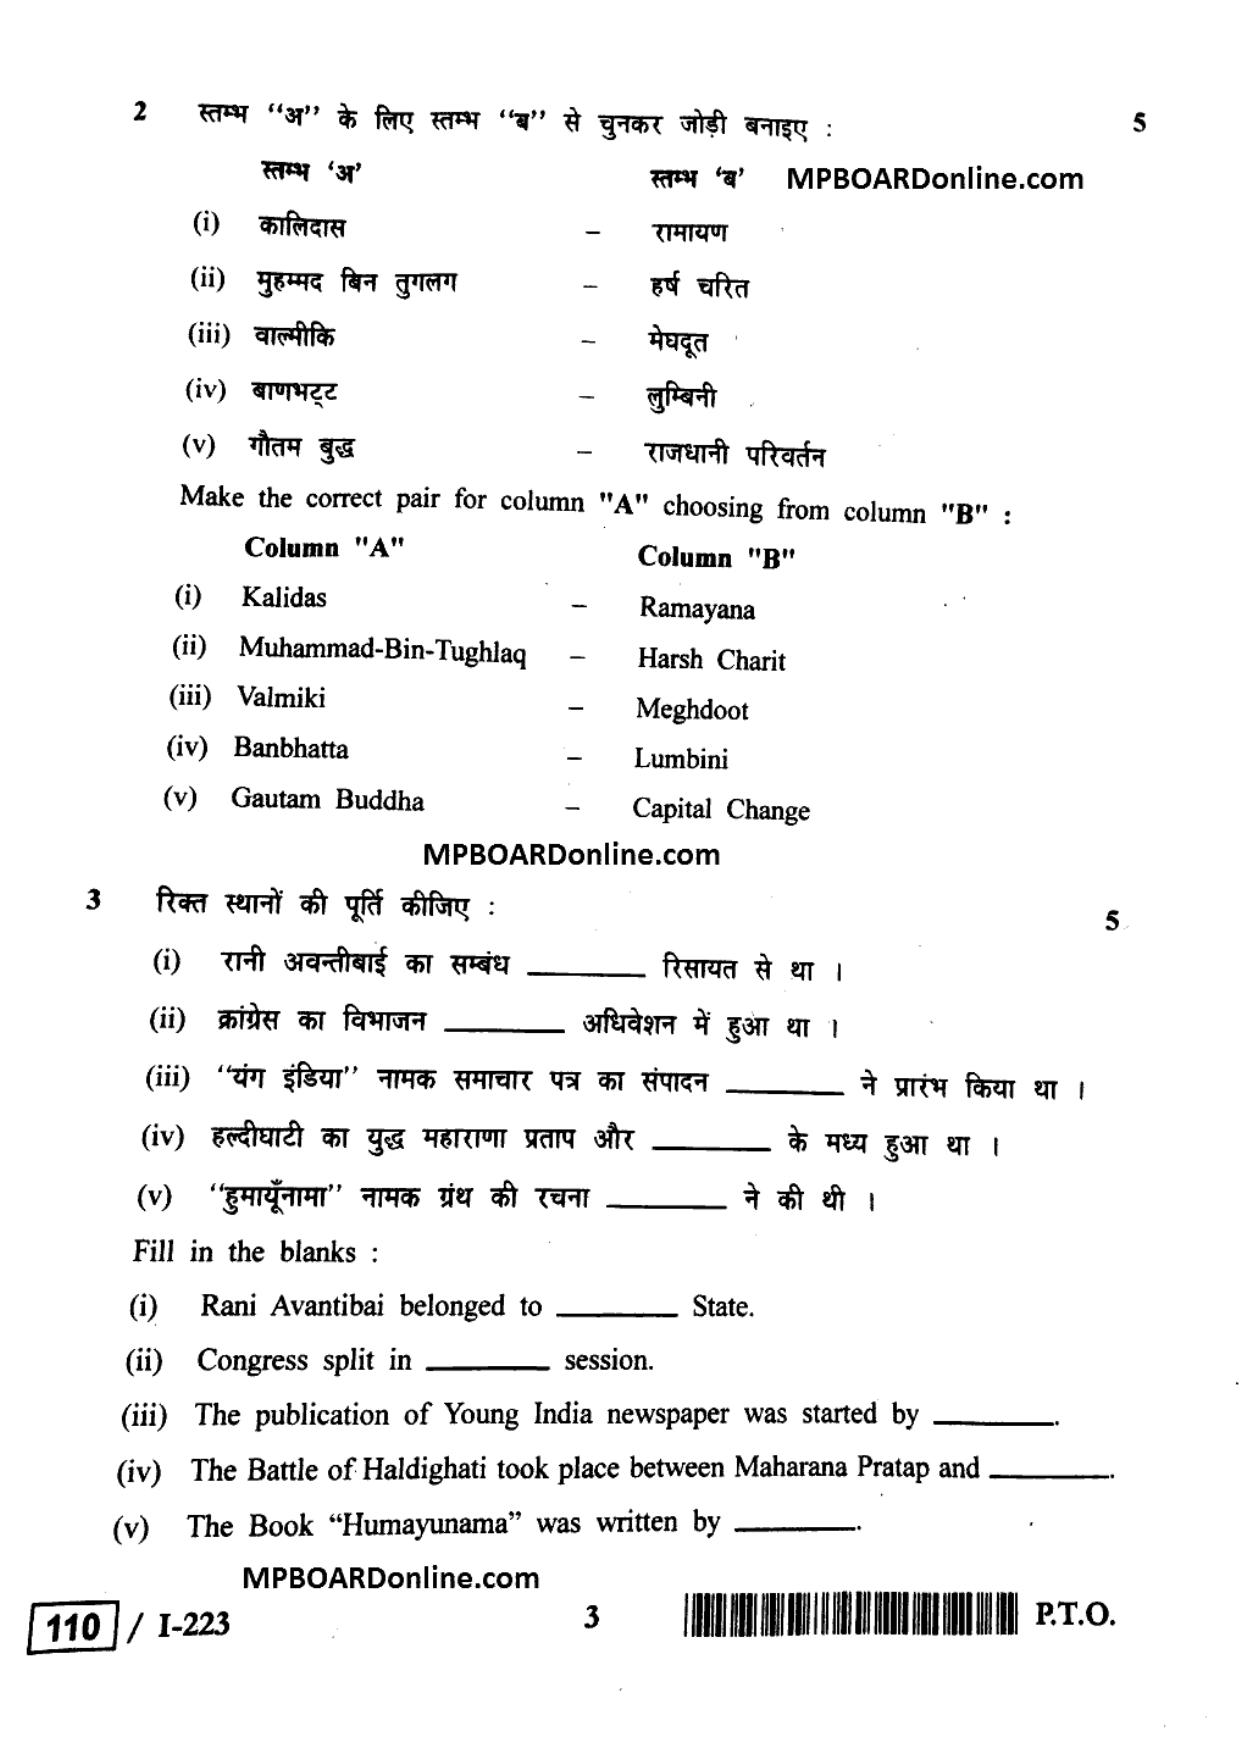 MP Board Class 12 History 2018 Question Paper - Page 3